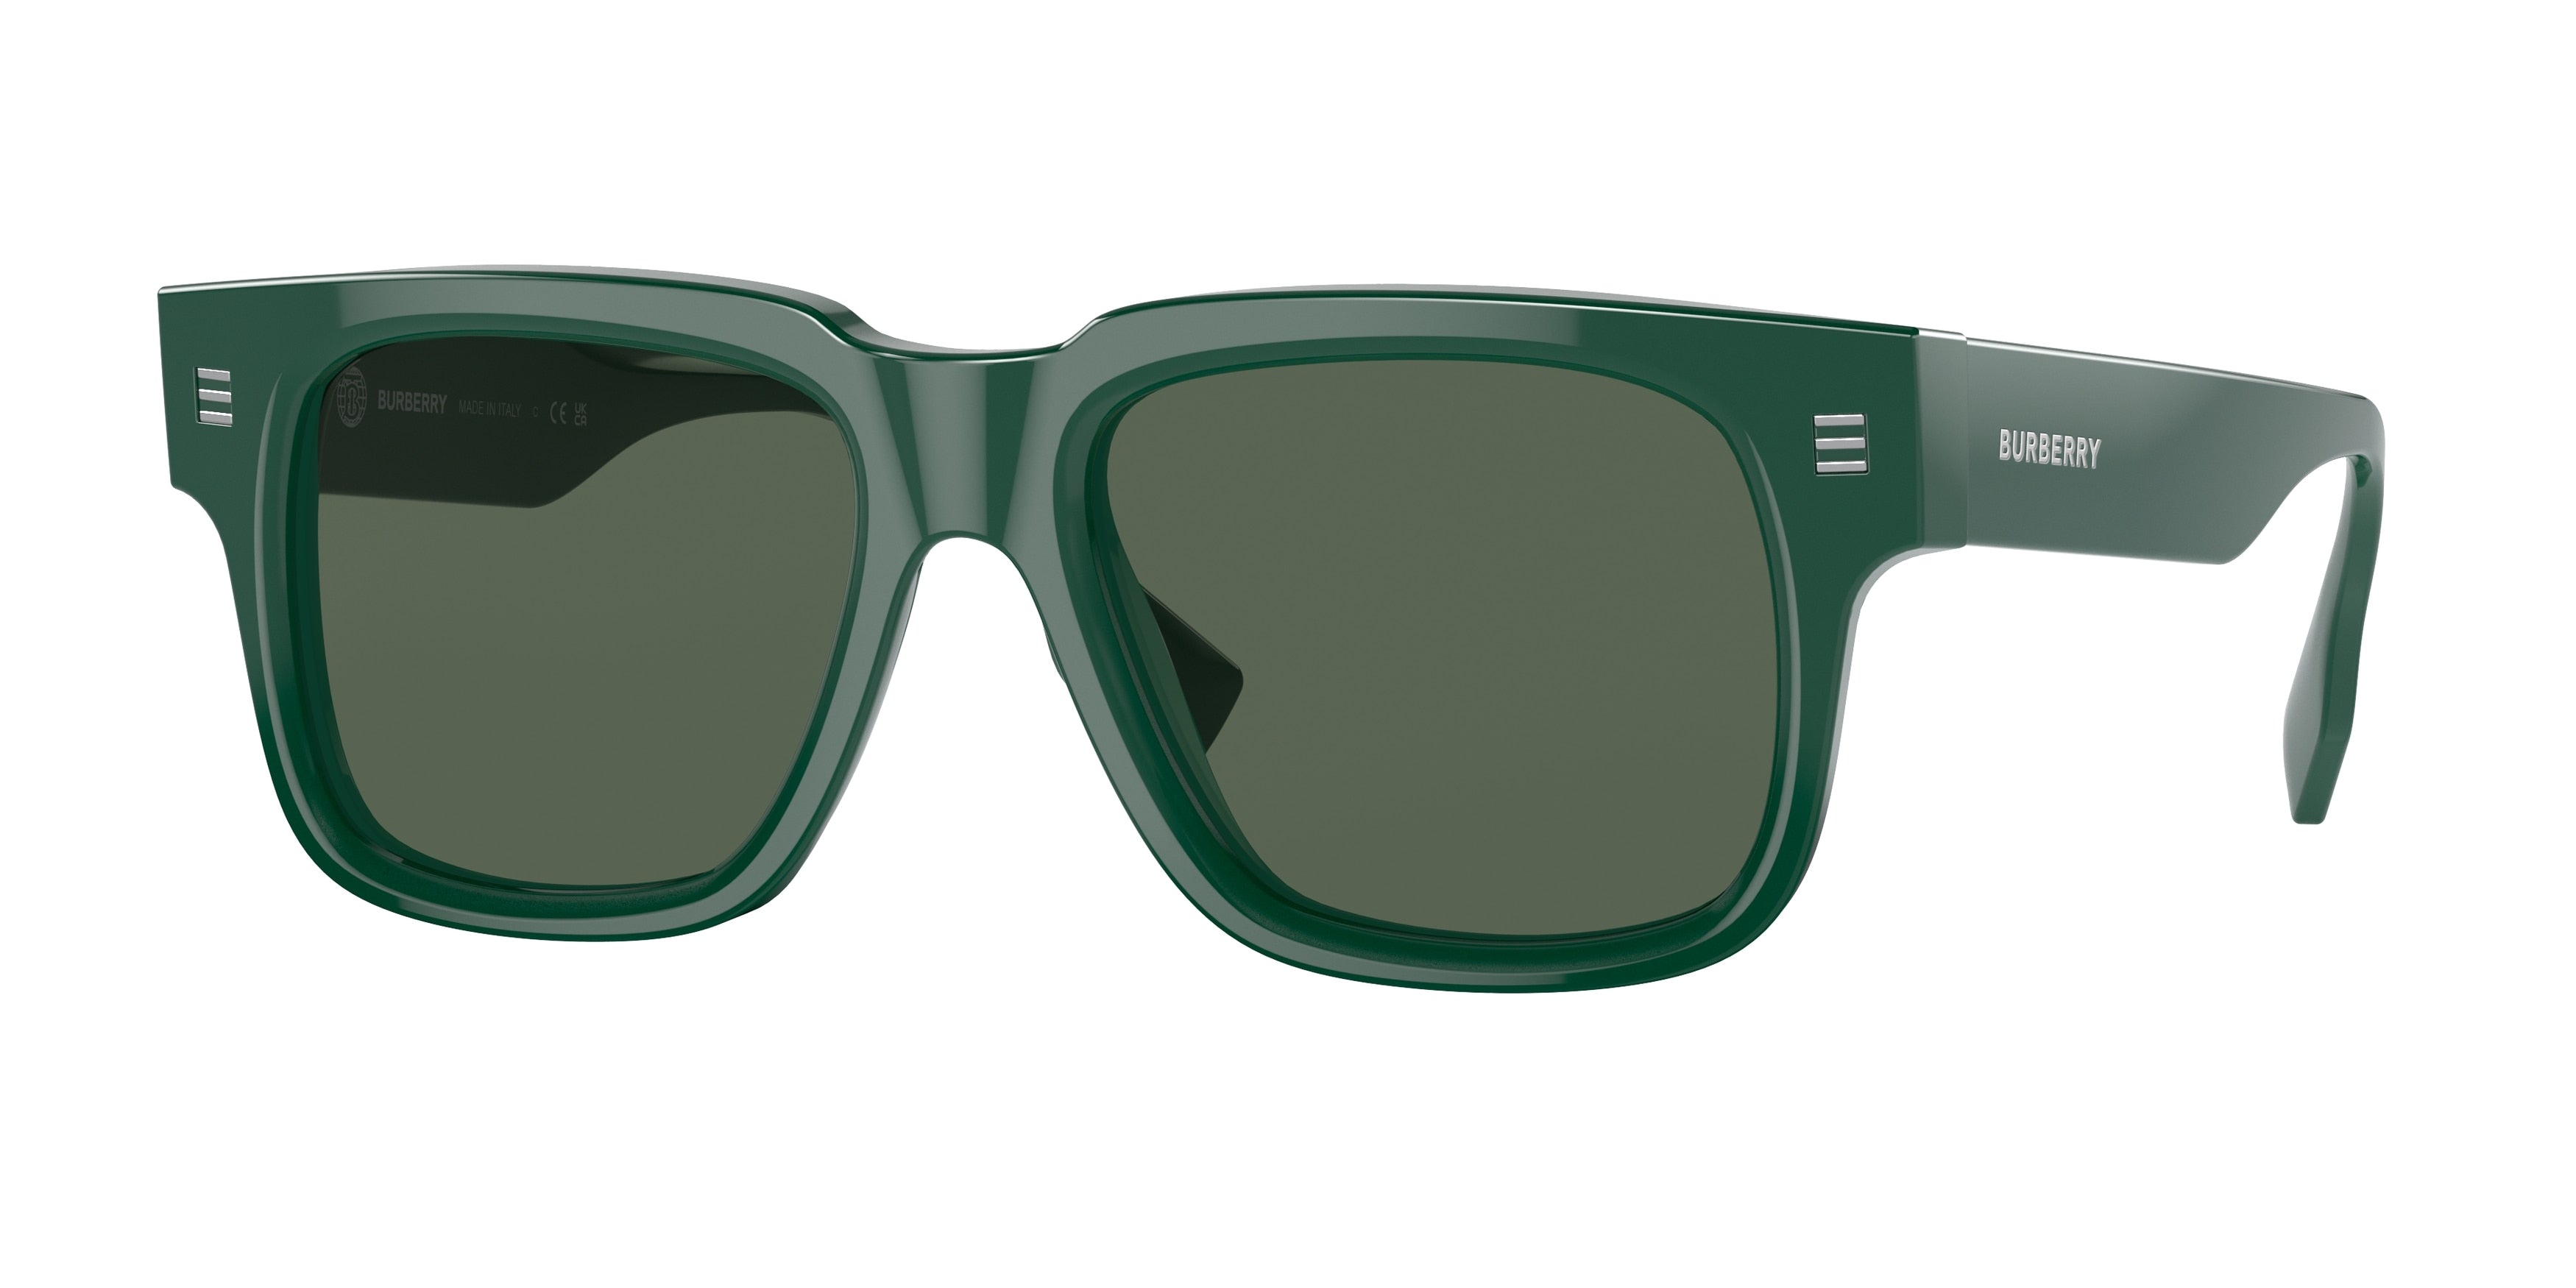 Burberry HAYDEN BE4394 Square Sunglasses  405971-Green 54-150-18 - Color Map Green